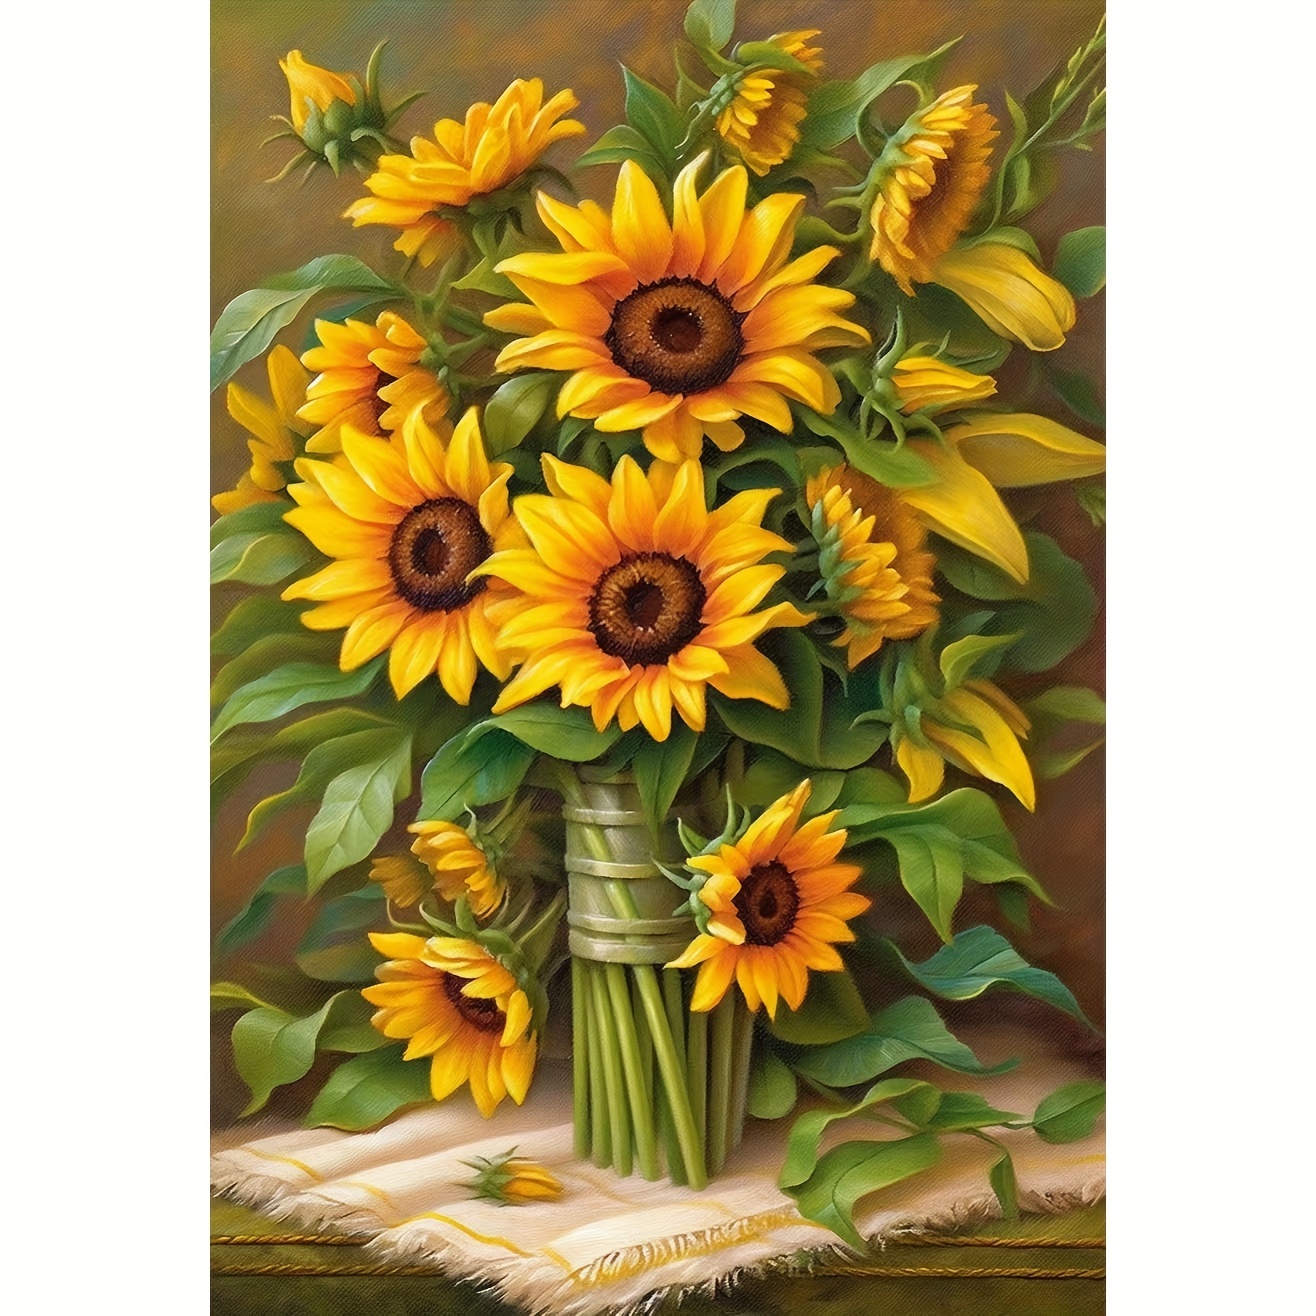 

Sunflower 5d Diamond Painting Kit, 11.8x15.7in, Full Drill Round Diamond Art, Diy Embroidery Cross Stitch For Wall Decor, Frameless Craft Gift